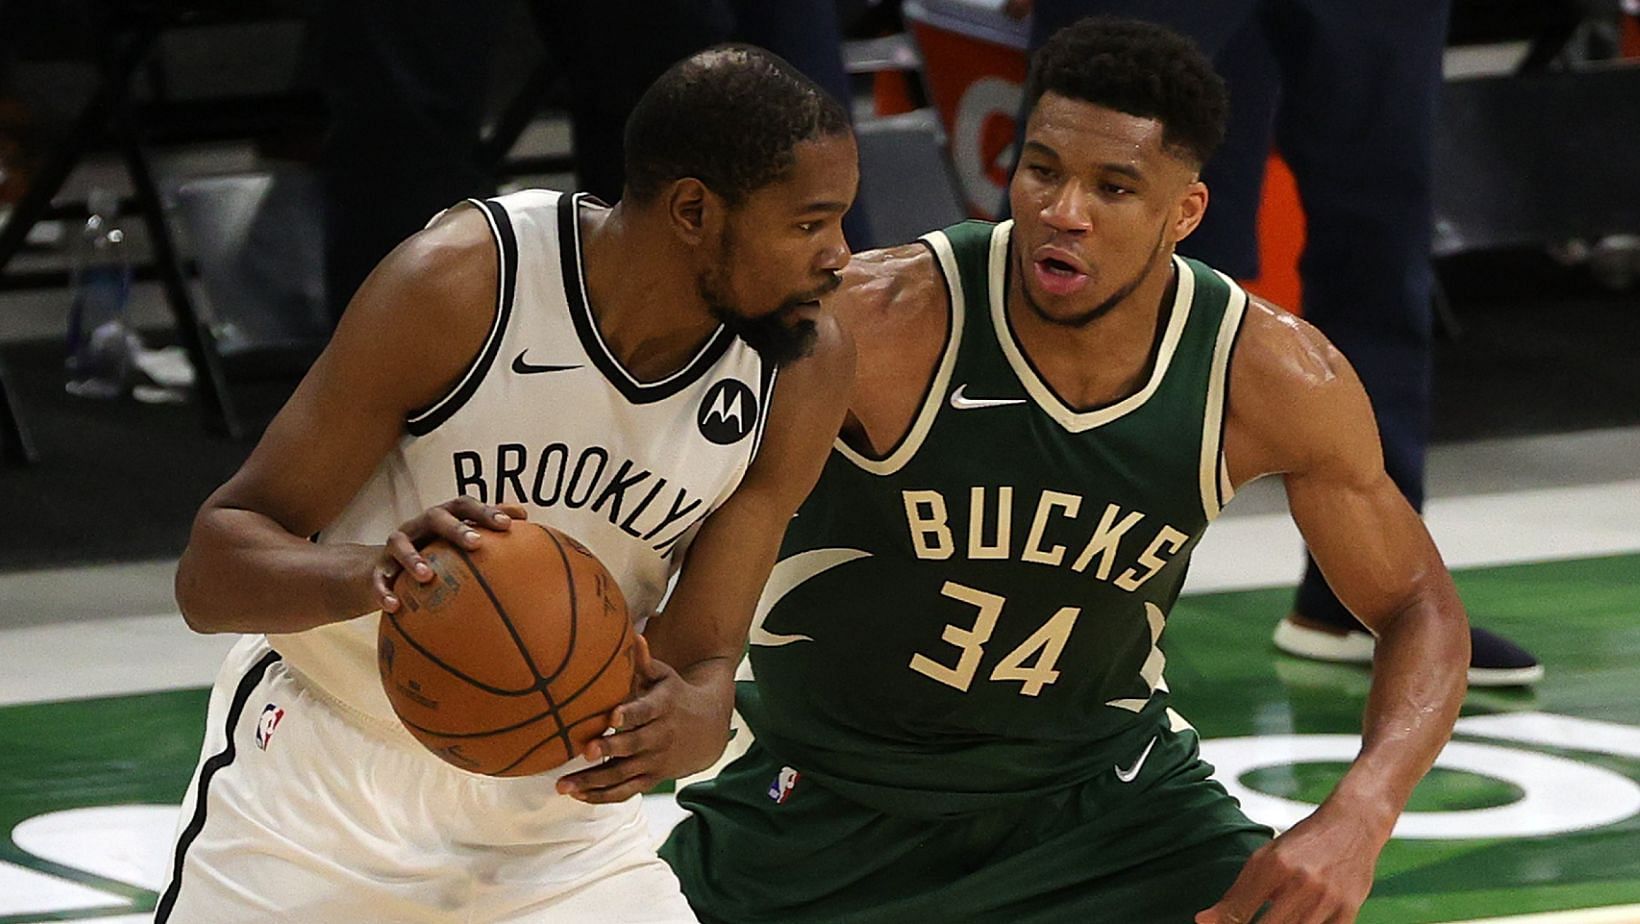 Despite injuries to Kyrie Irving and James Harden, Kevin Durant nearly led the Brooklyn Nets to a stunning playoff series win over the Milwaukee Bucks in 2021.